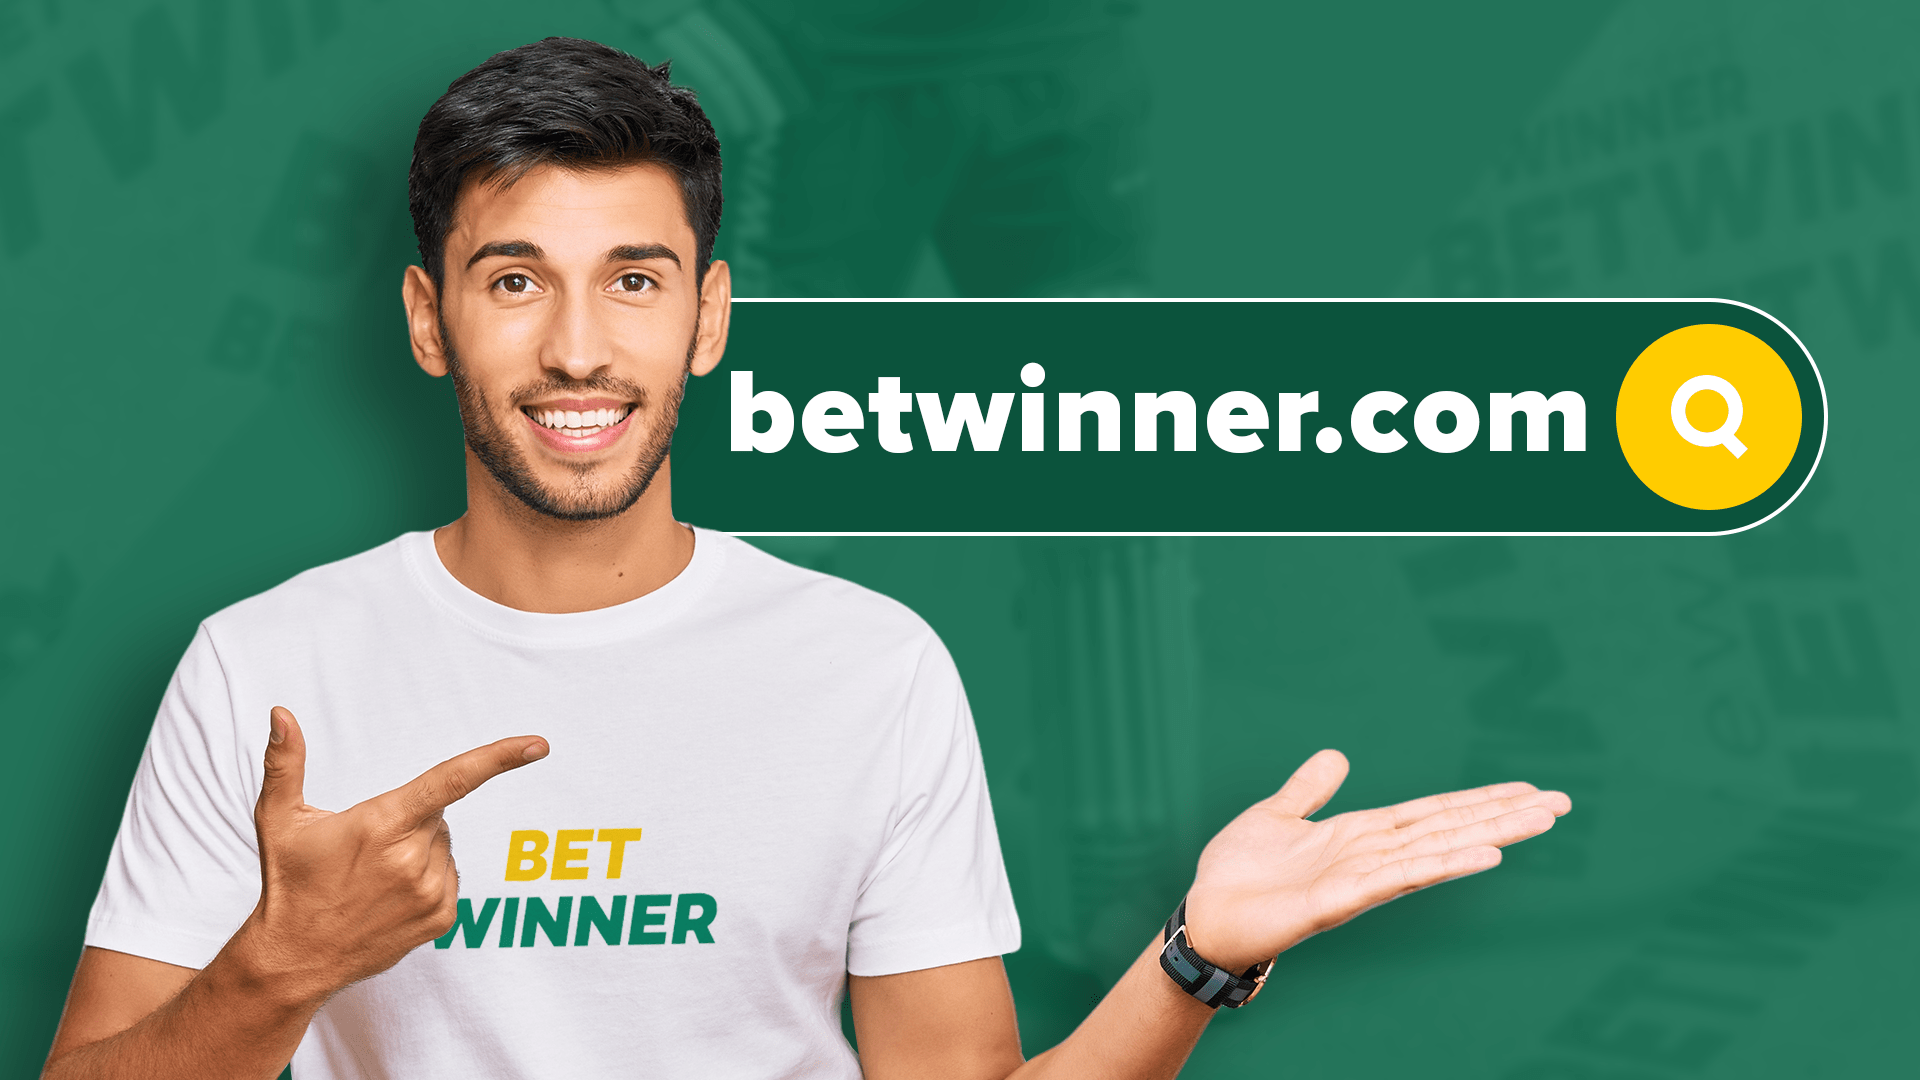 Easy Steps To Betwinnerアフィリエイトプログラム Of Your Dreams